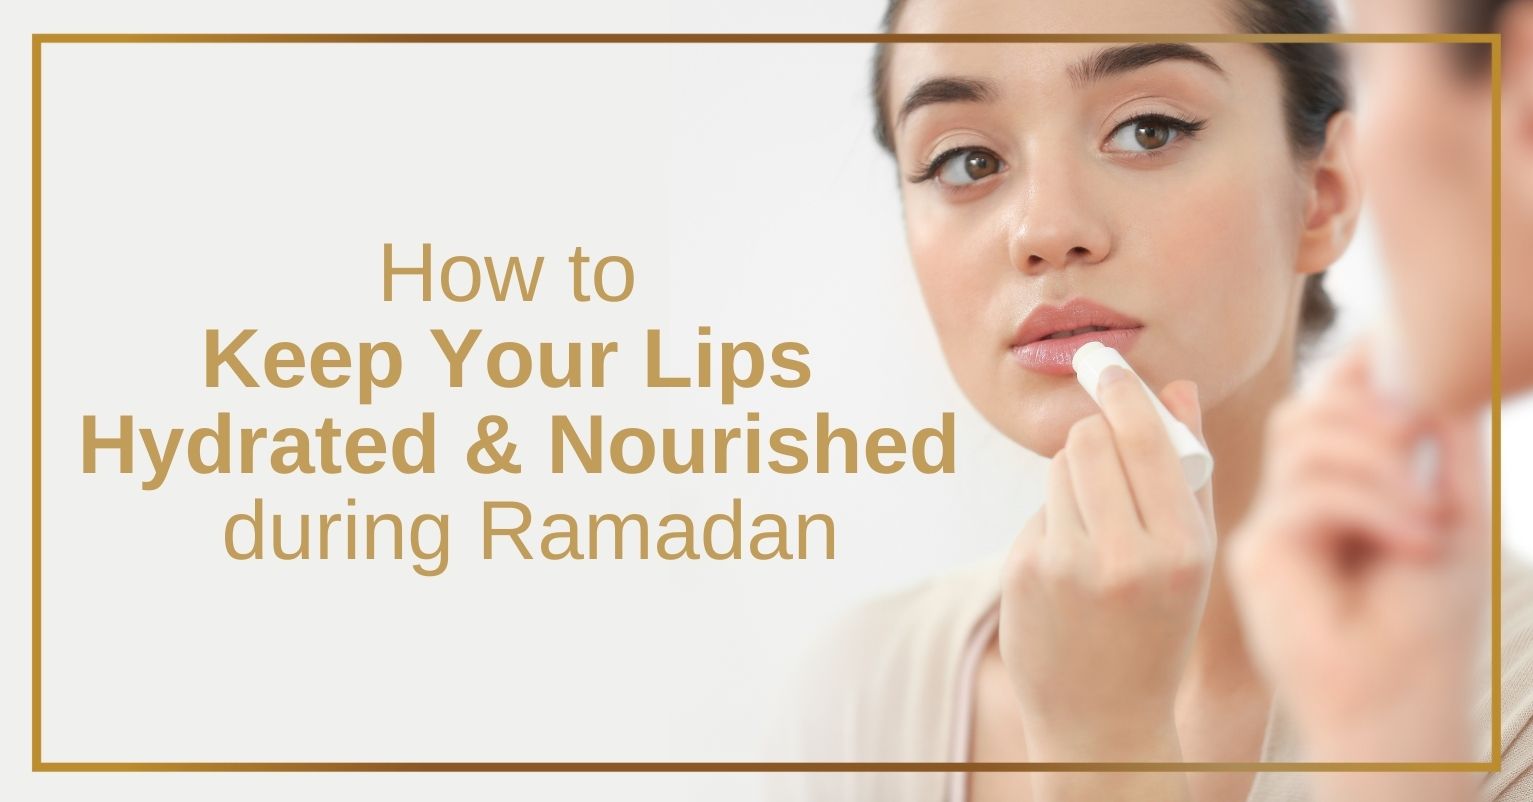 How to Keep Your Lips Hydrated and Nourished during Ramadan?